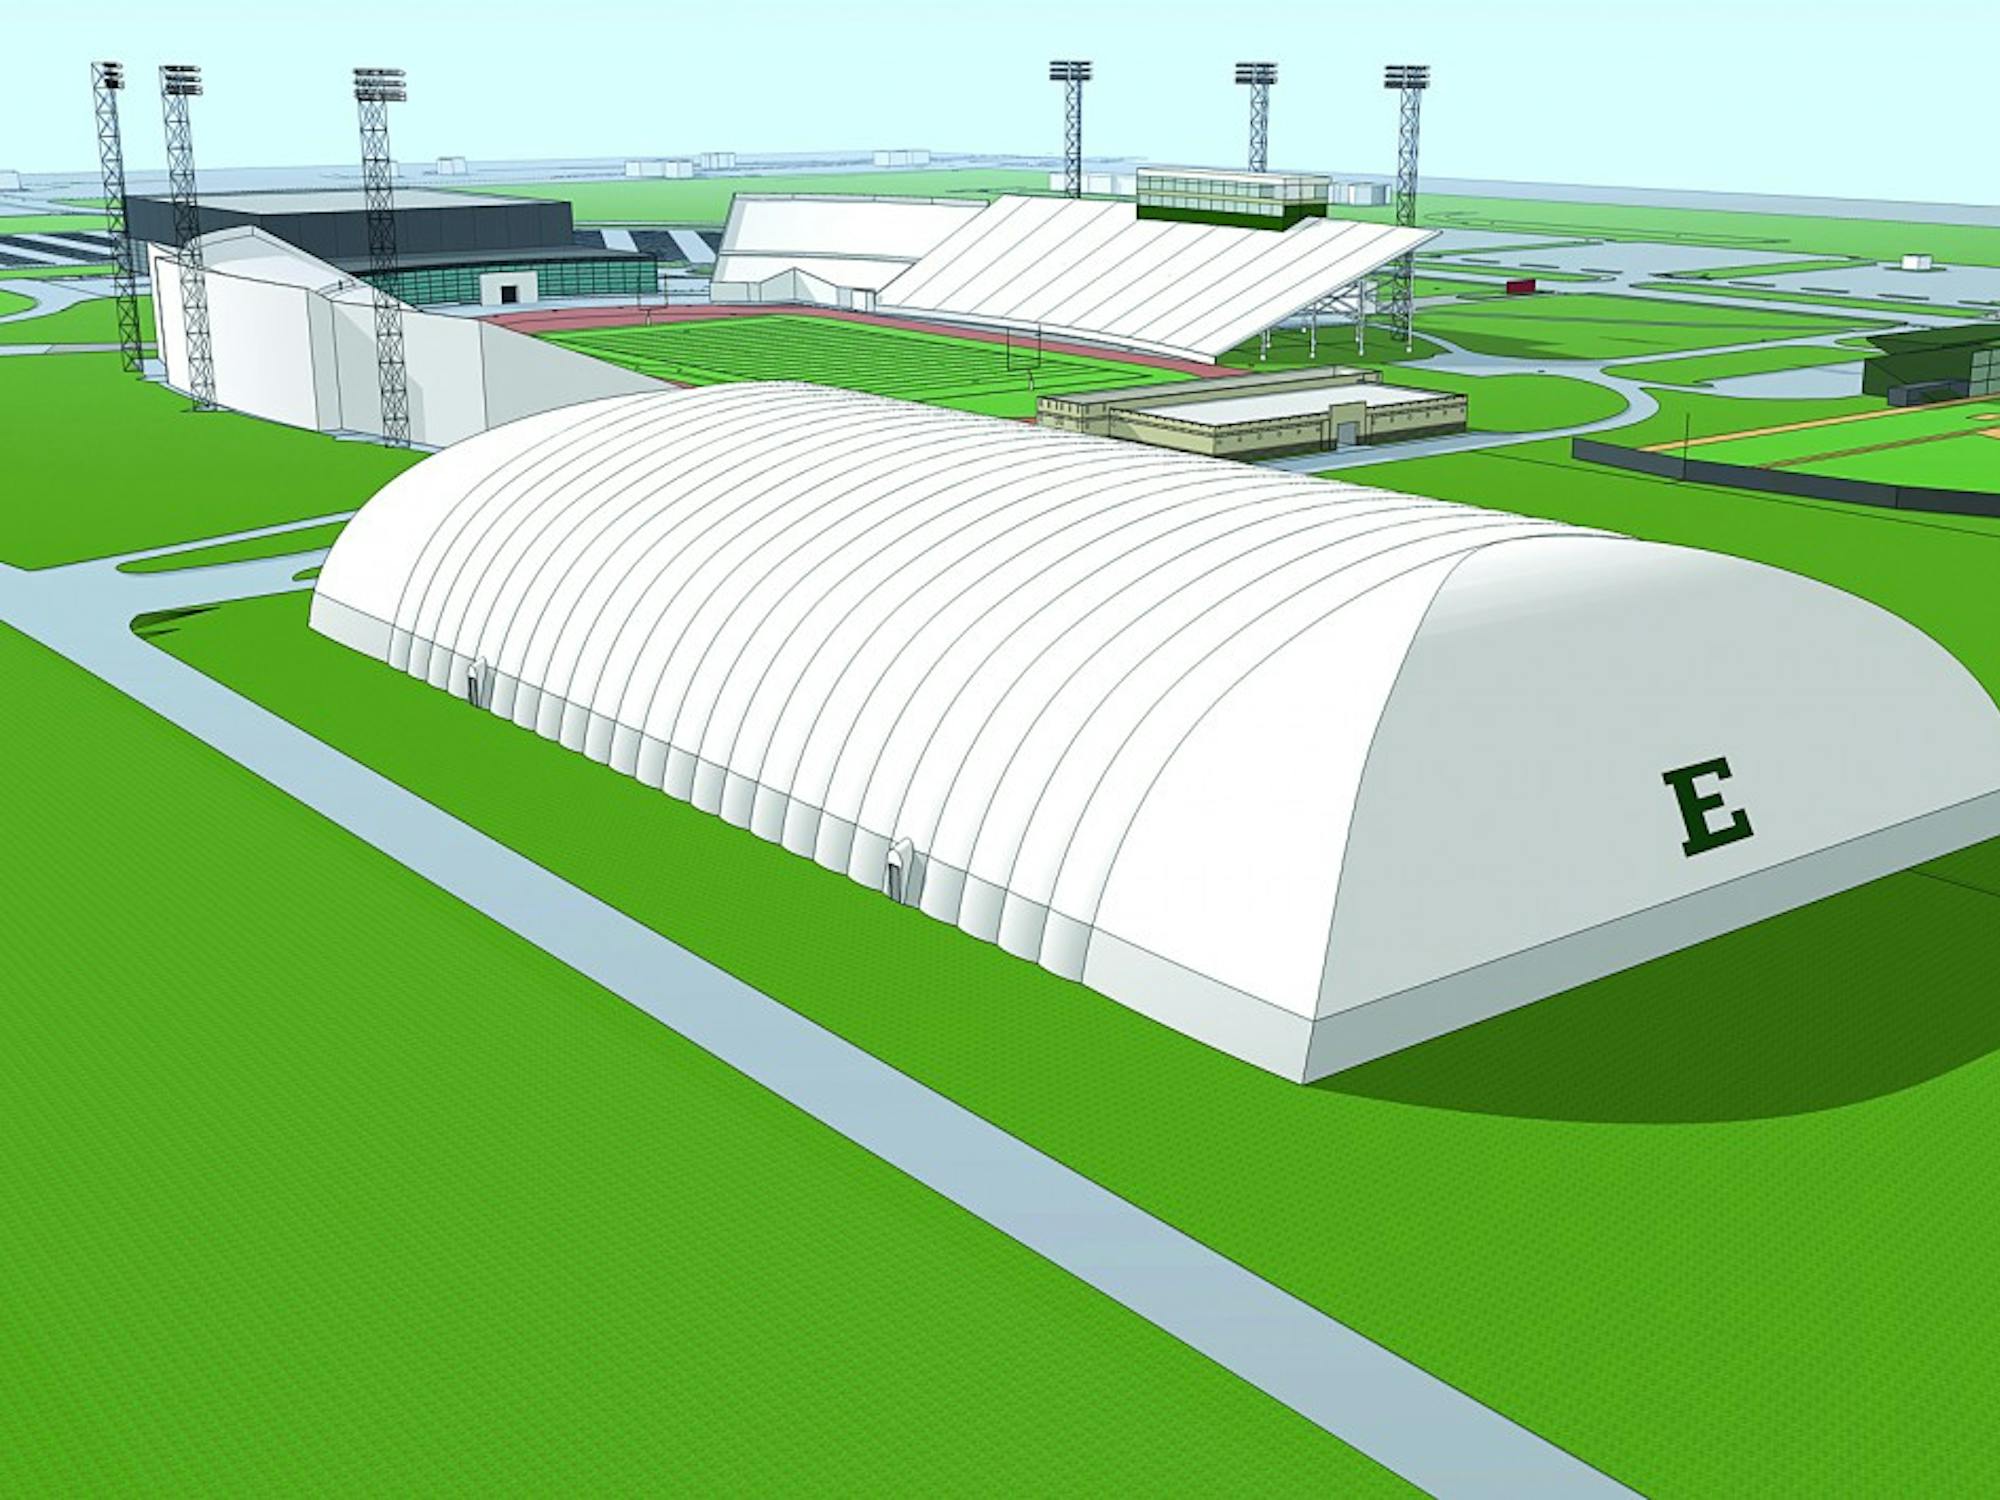 	A digital representation of the practice facility, which is expected to be 410 feet long, 210 feet wide and 75 feet tall.